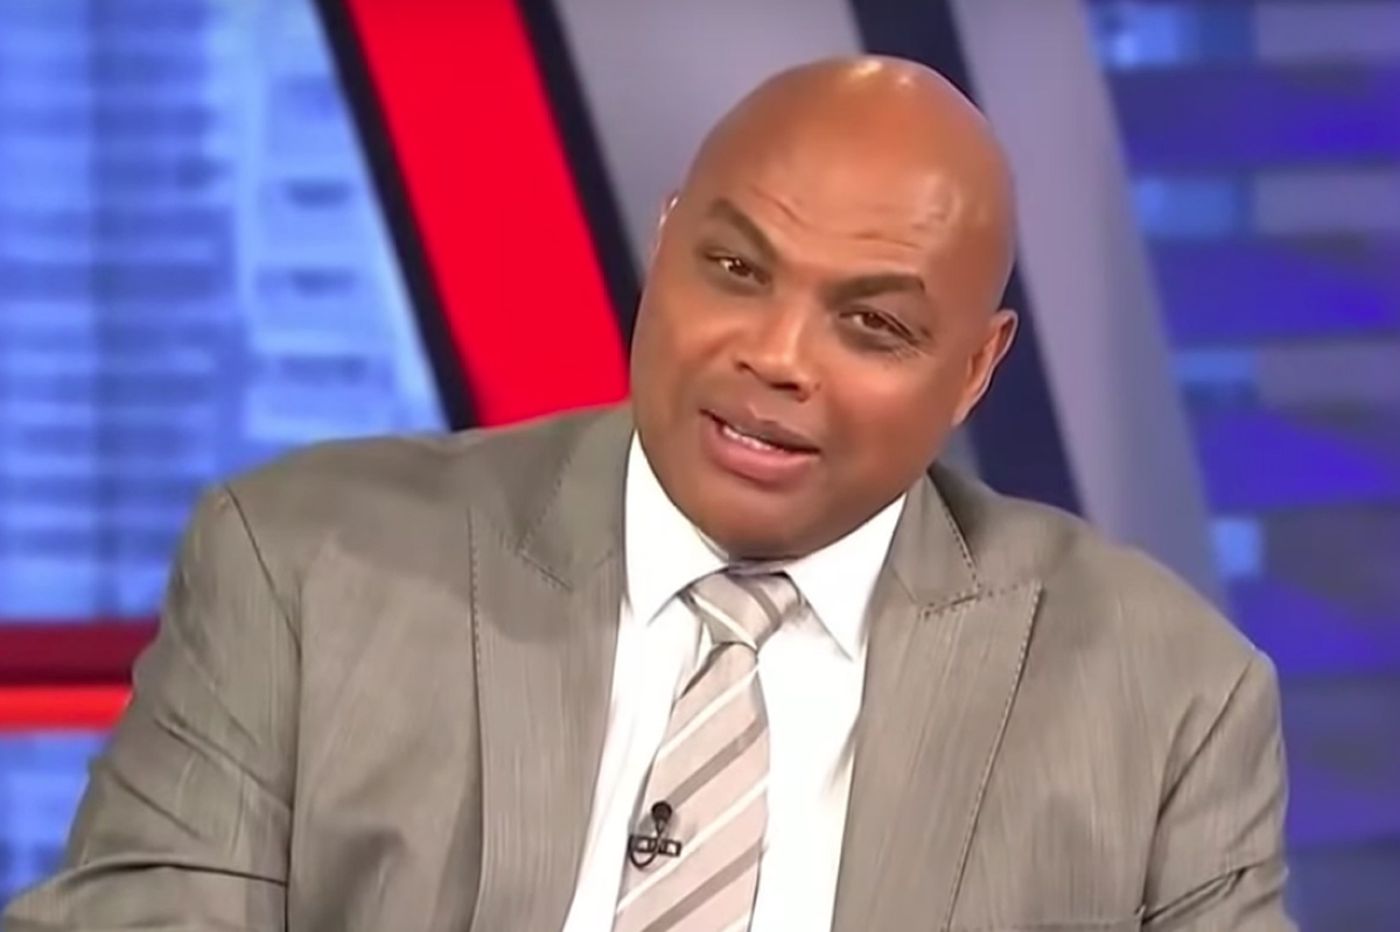 What is Charles Barkley TNT salary?